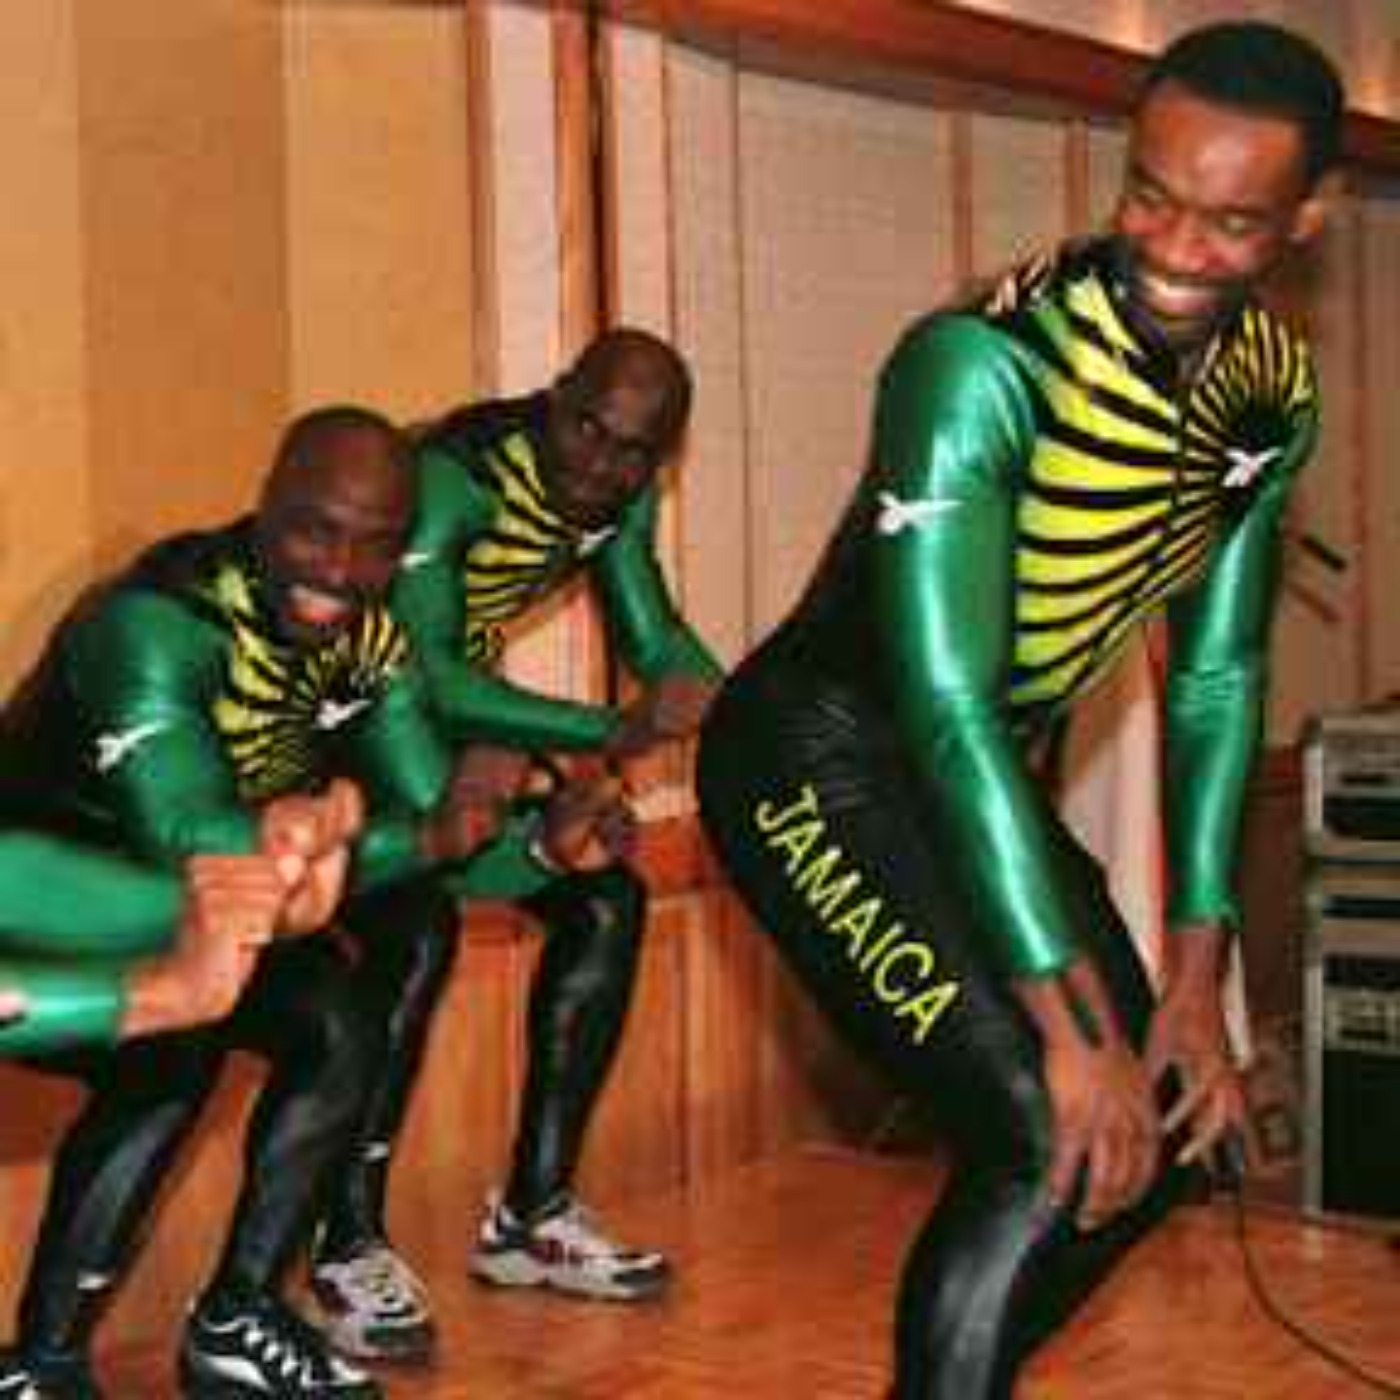 The Jamaican Bobsled Team